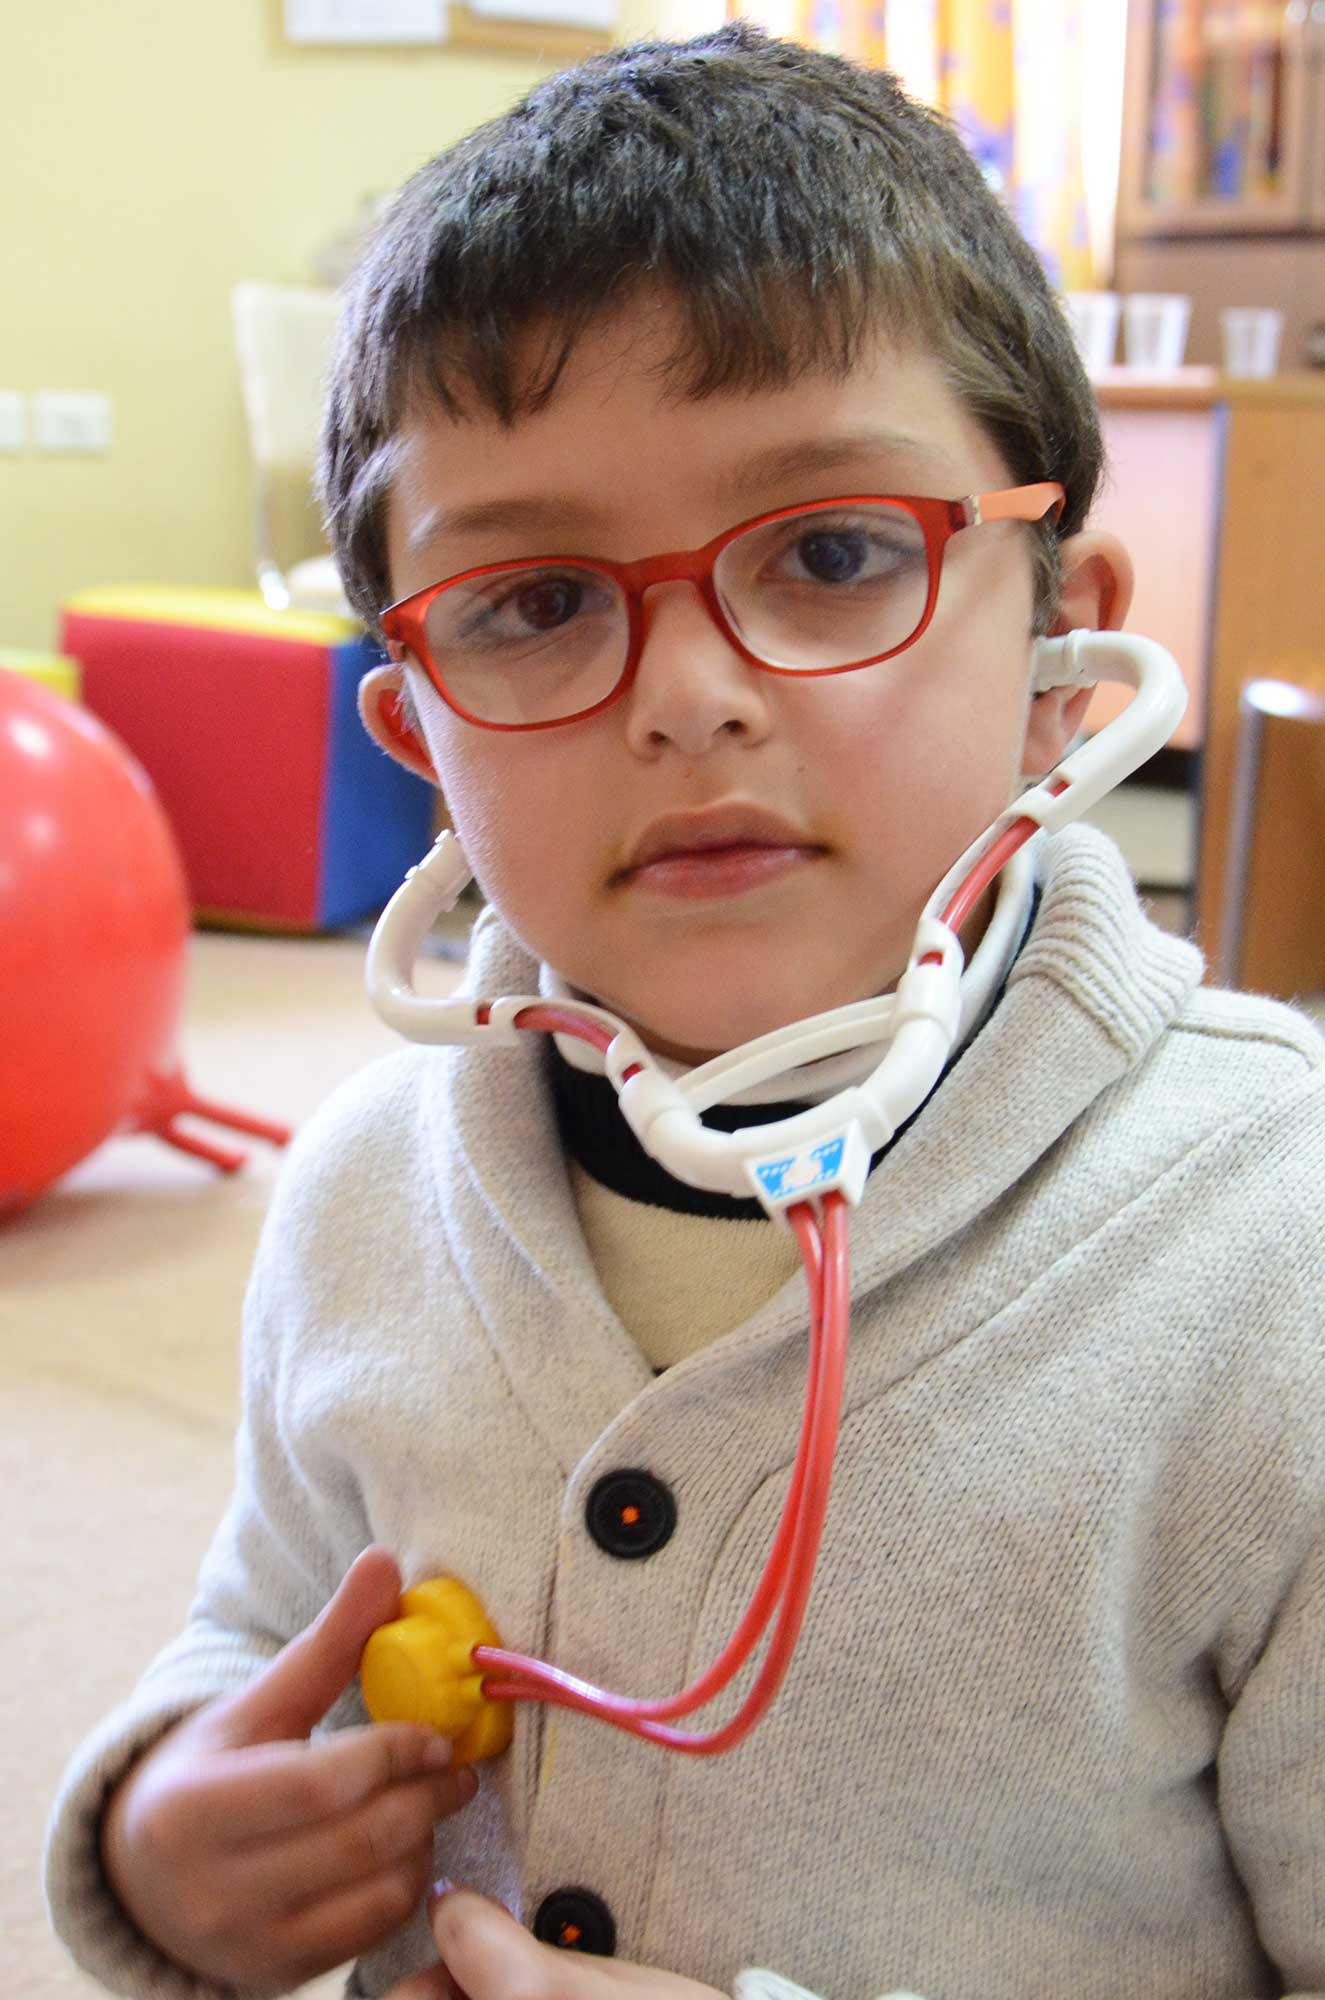 After three months of educational support at the Spafford Center, Mohammad’s motor skills have improved.